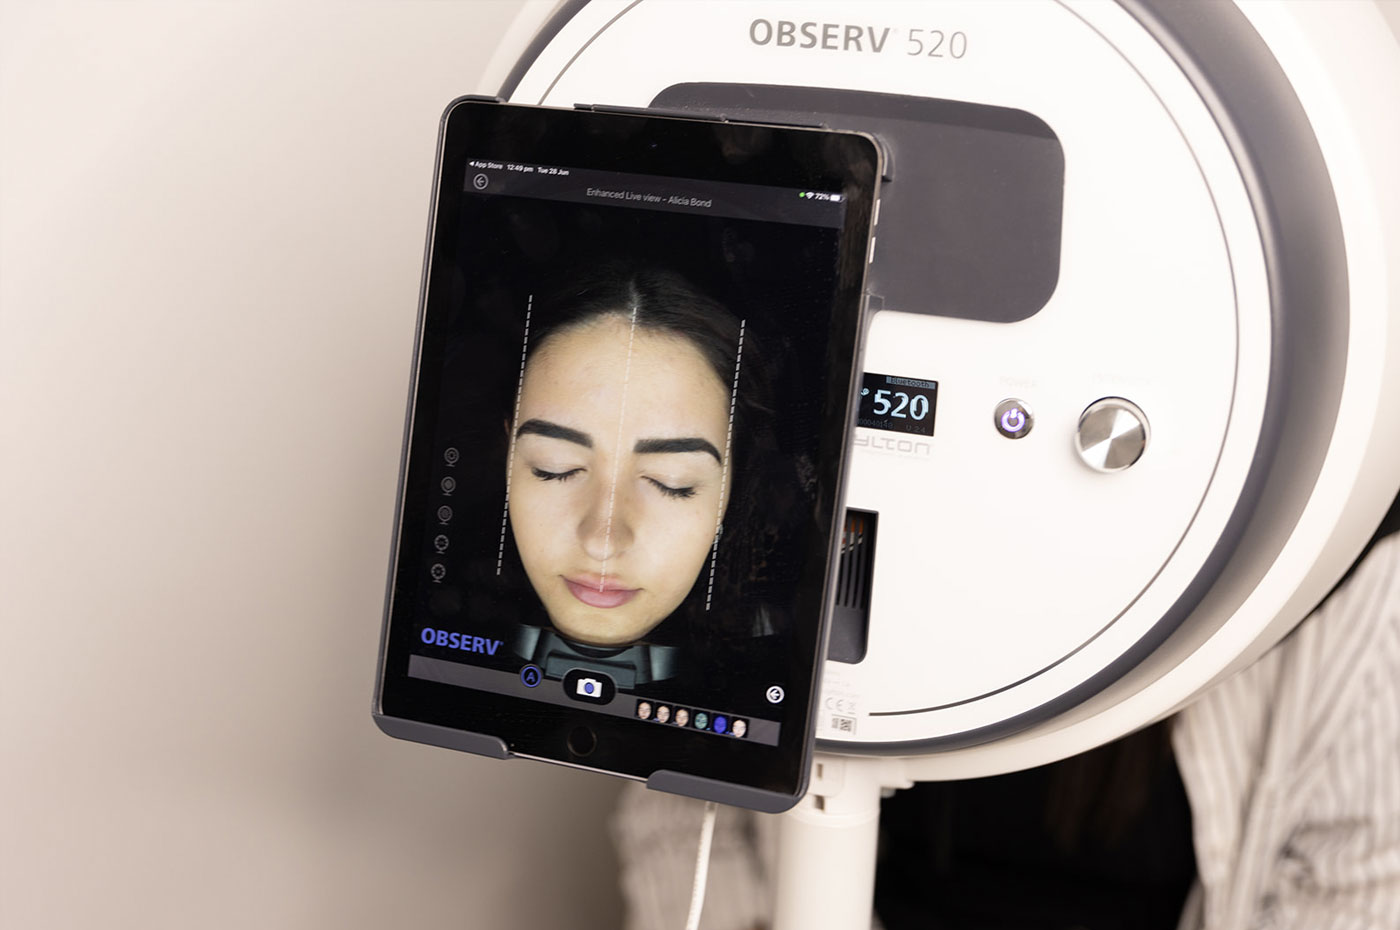 About Face Clinic skin consulltation using Observ 520 state-of-the-art skin analysing system